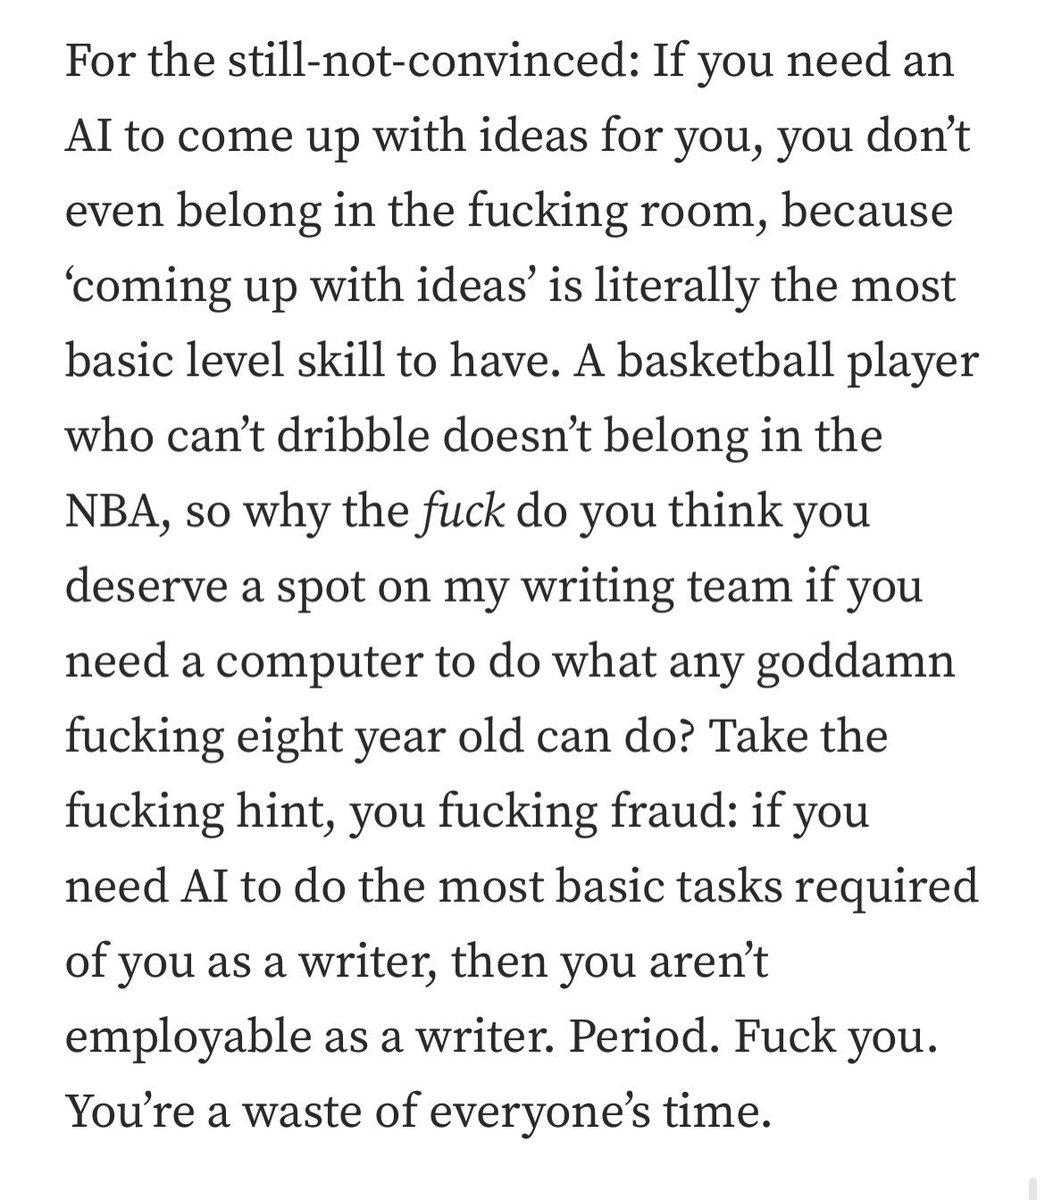 I saw an ad for an AI script to generate entire novels, and it boasted an “export to kindle store” feature. People are really out there thinking they can monetize writing a couple sentences into a prompt and uploading the procedural drivel that comes out. Grow up.